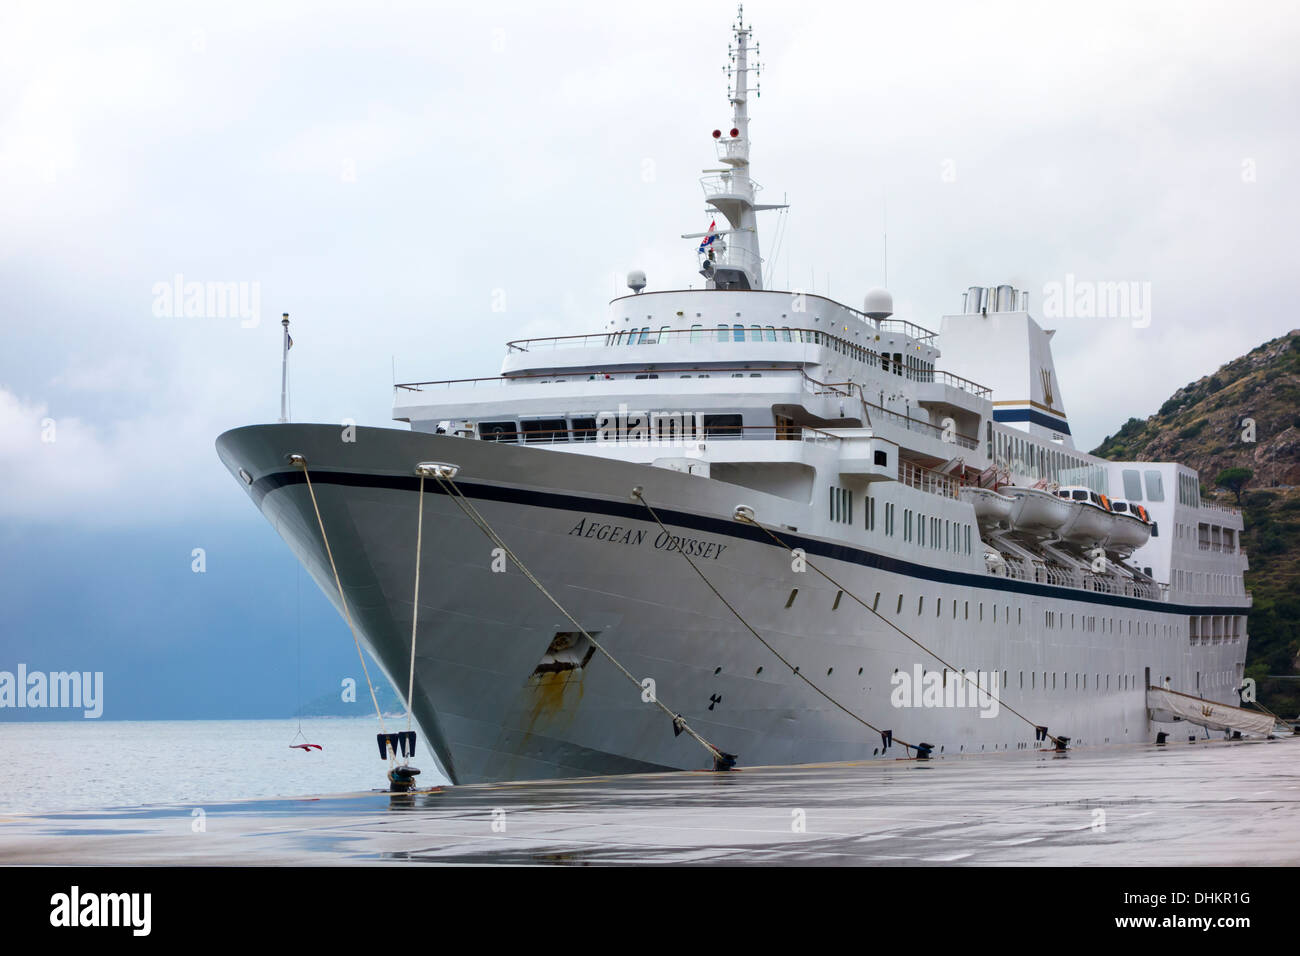 Ship Aegean Odyssey docked at quayside  in Europe Stock Photo